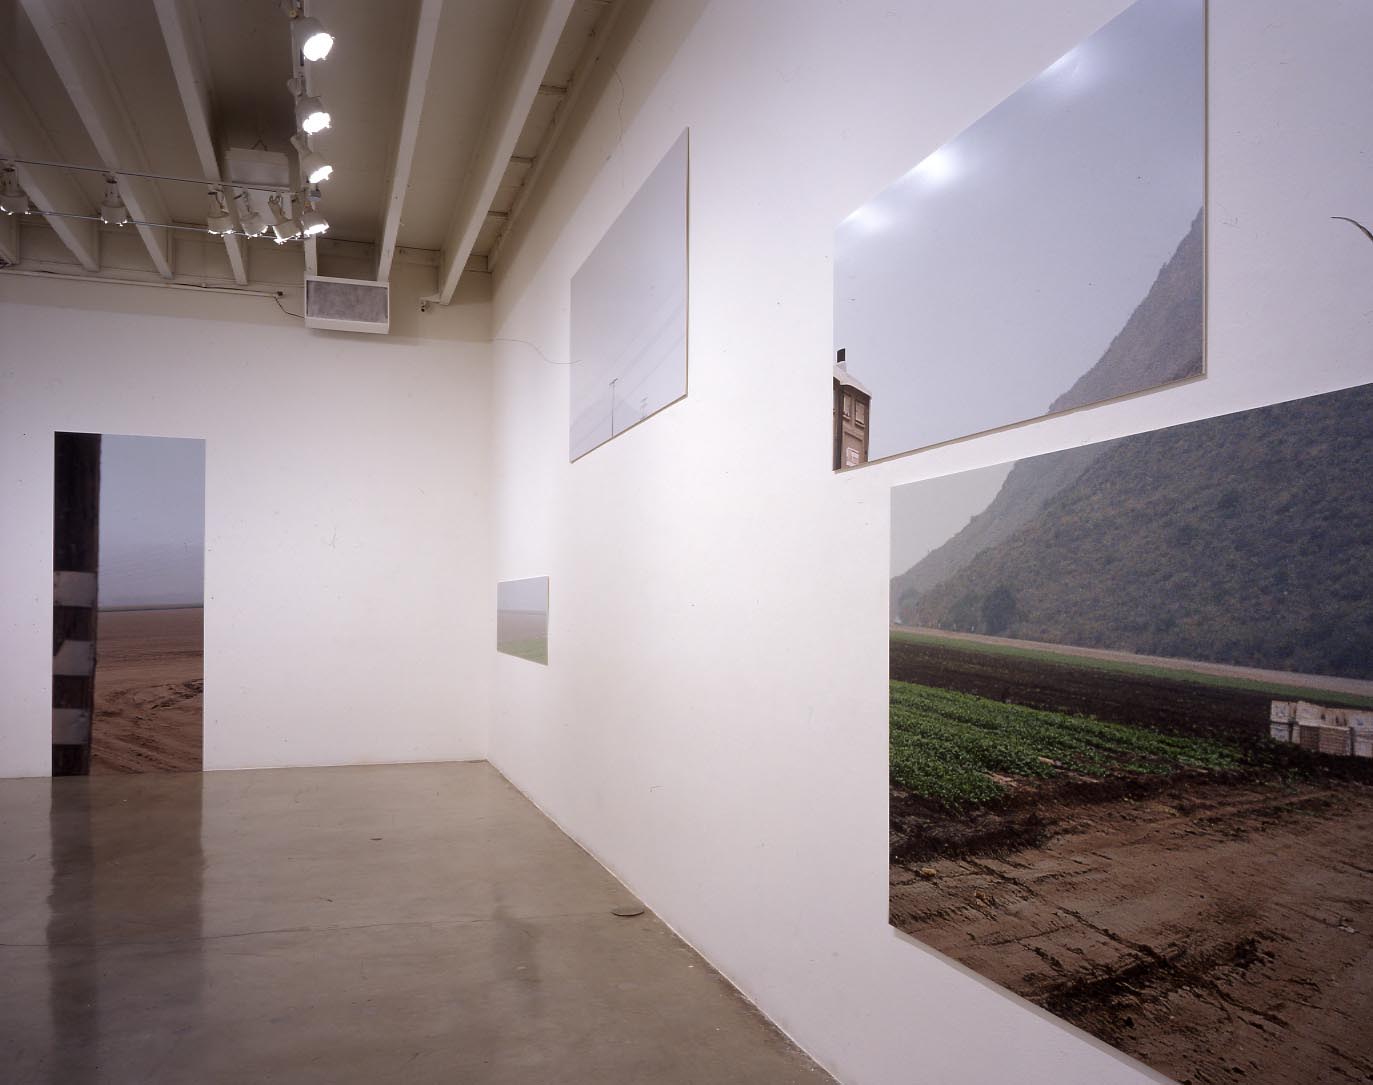 Land and Sea (installation), Peggy Phelps Gallery, Claremont Graduate University, Claremont, CA 2003